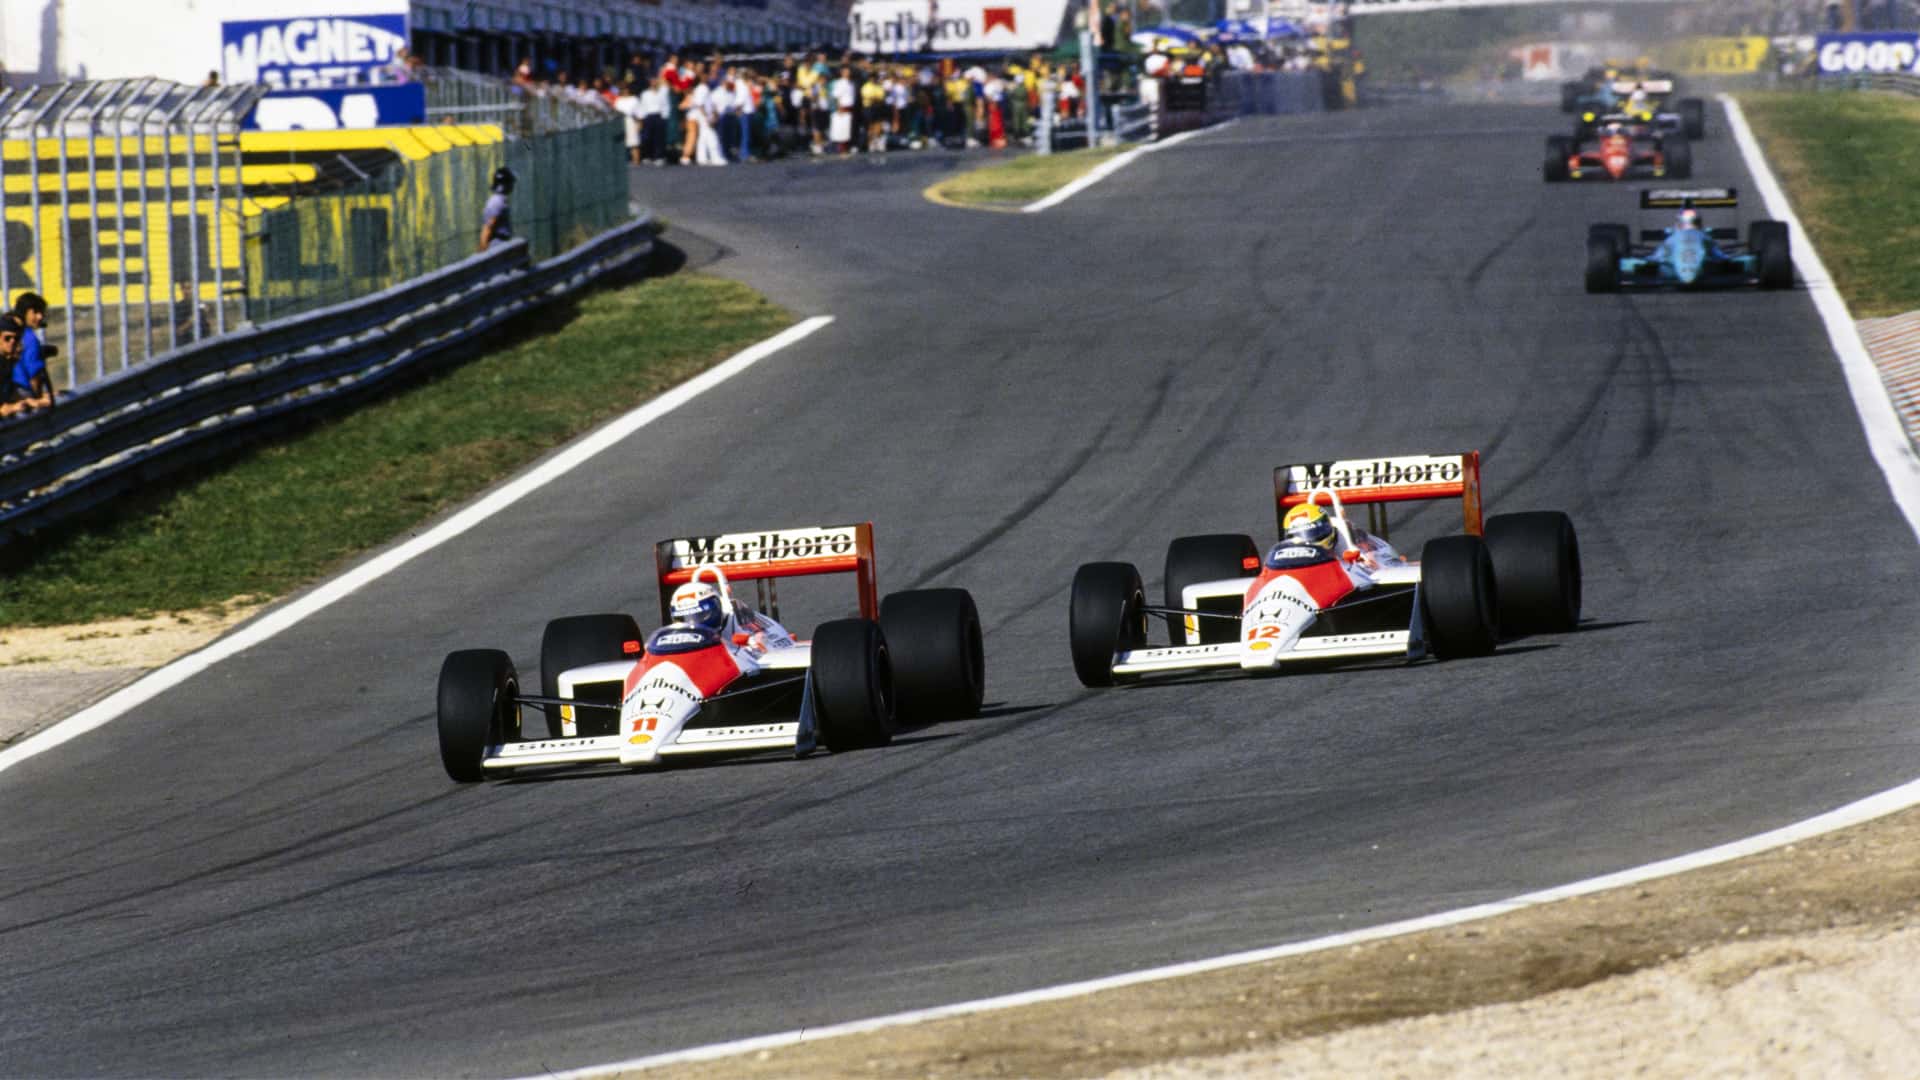 Senna and Prost's dominant McLaren MP4-4 could be coming to Gran Turismo 7